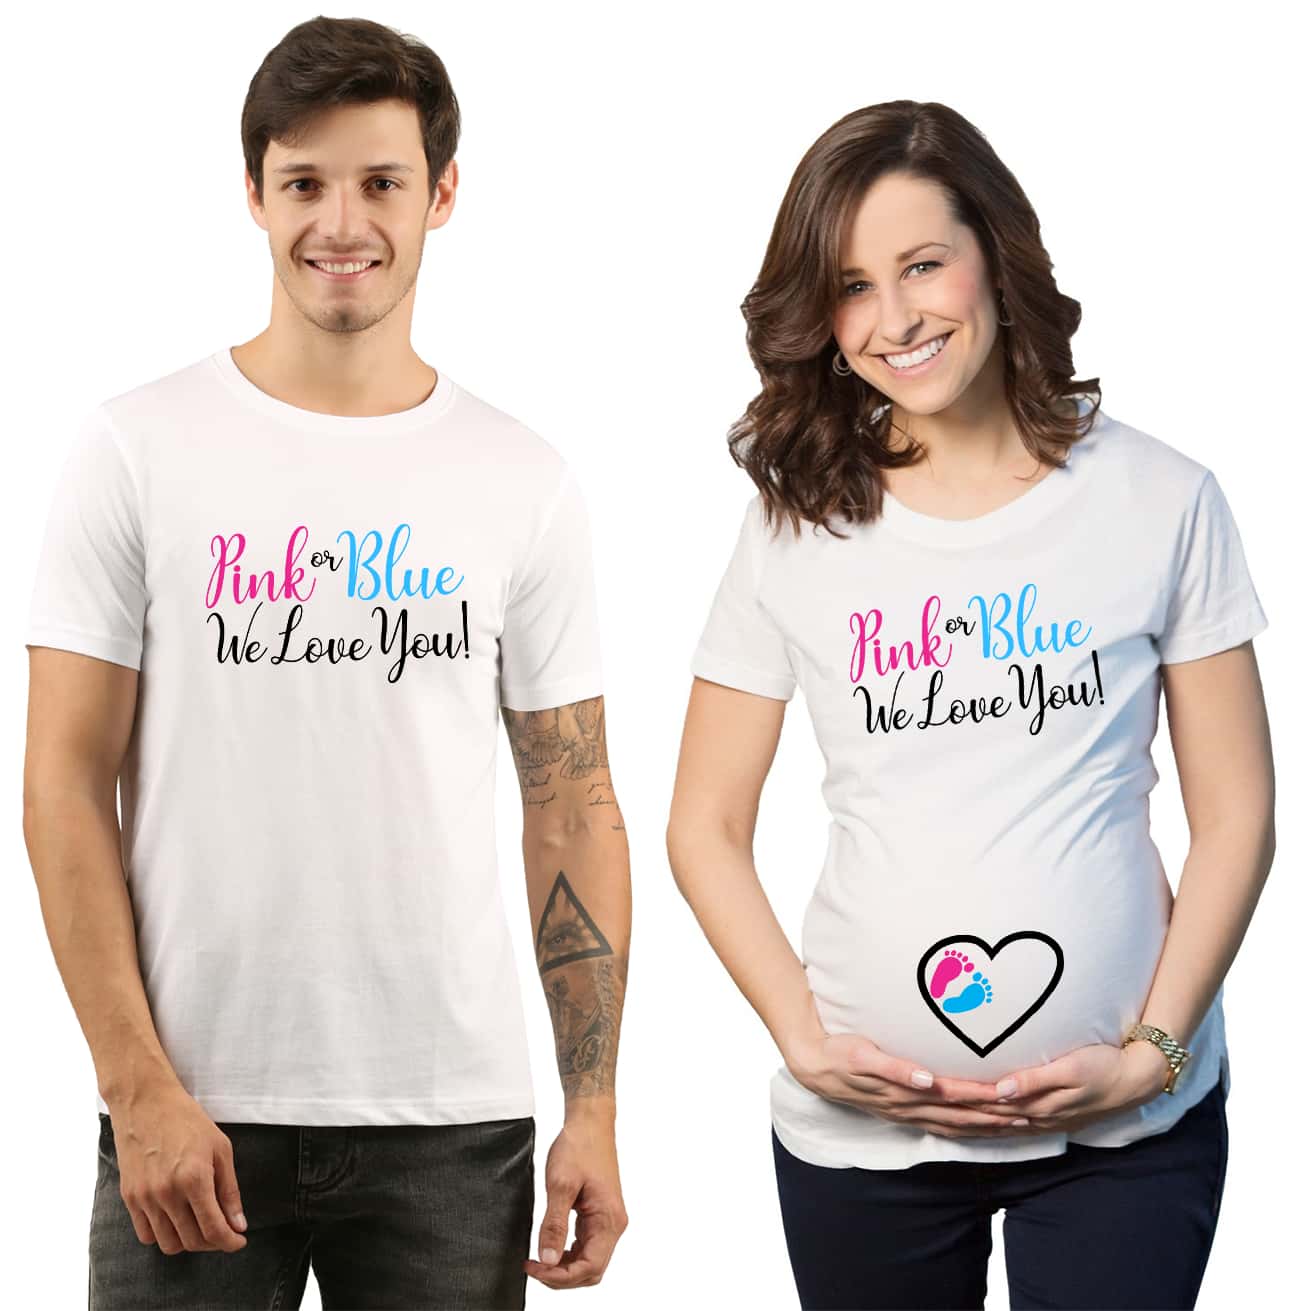 Pink or Blue We Love You Maternity Couple TShirts Online